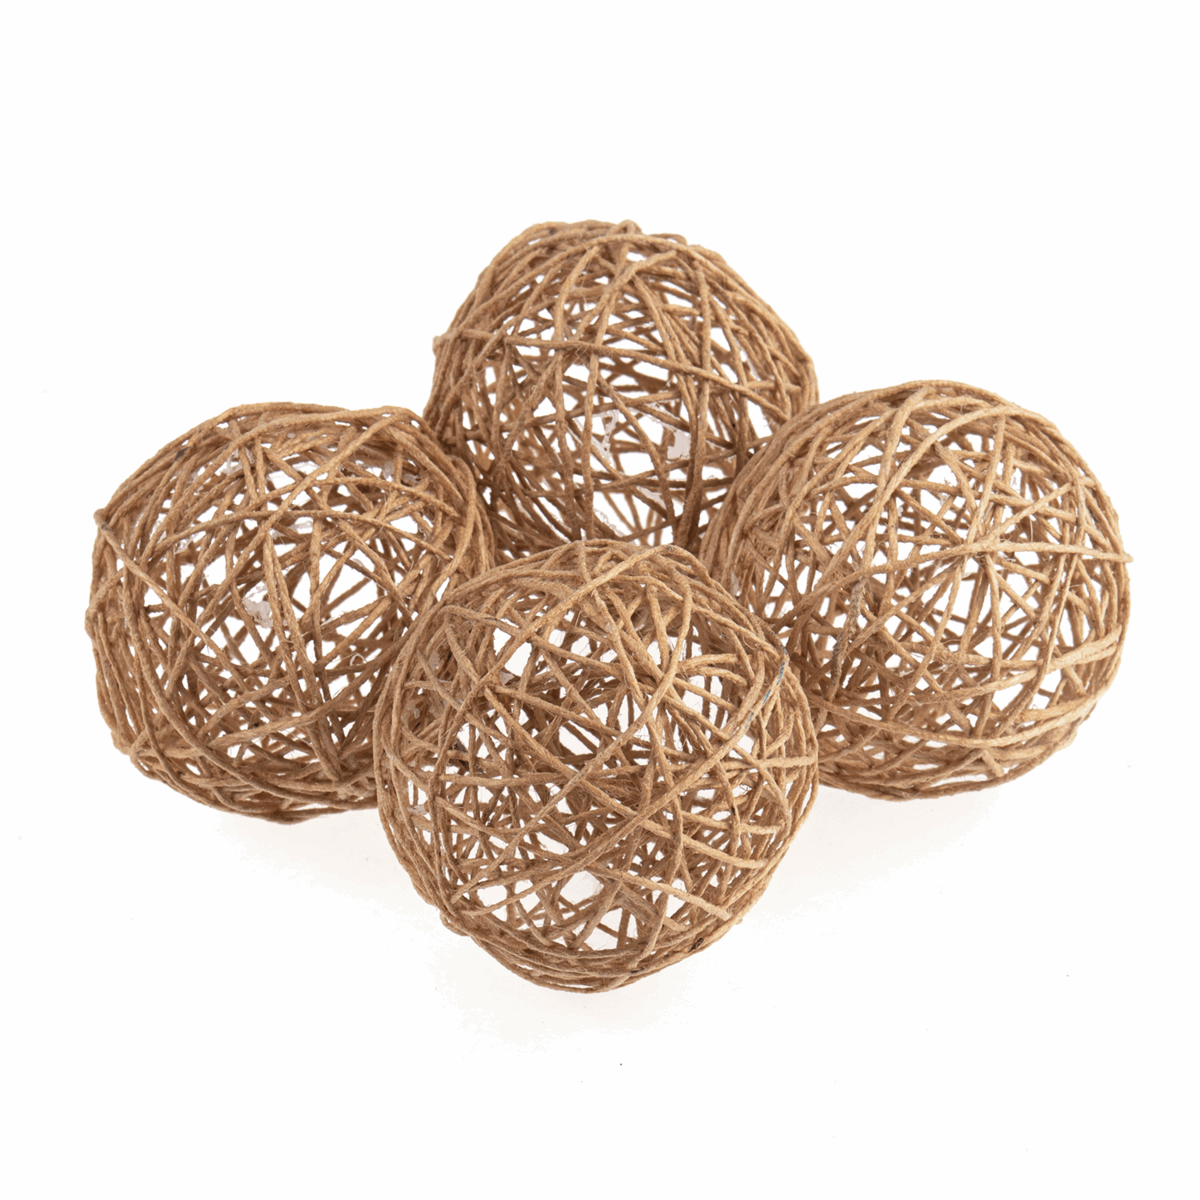 Woven Jute Balls - Large 60mm (Pack of 4)